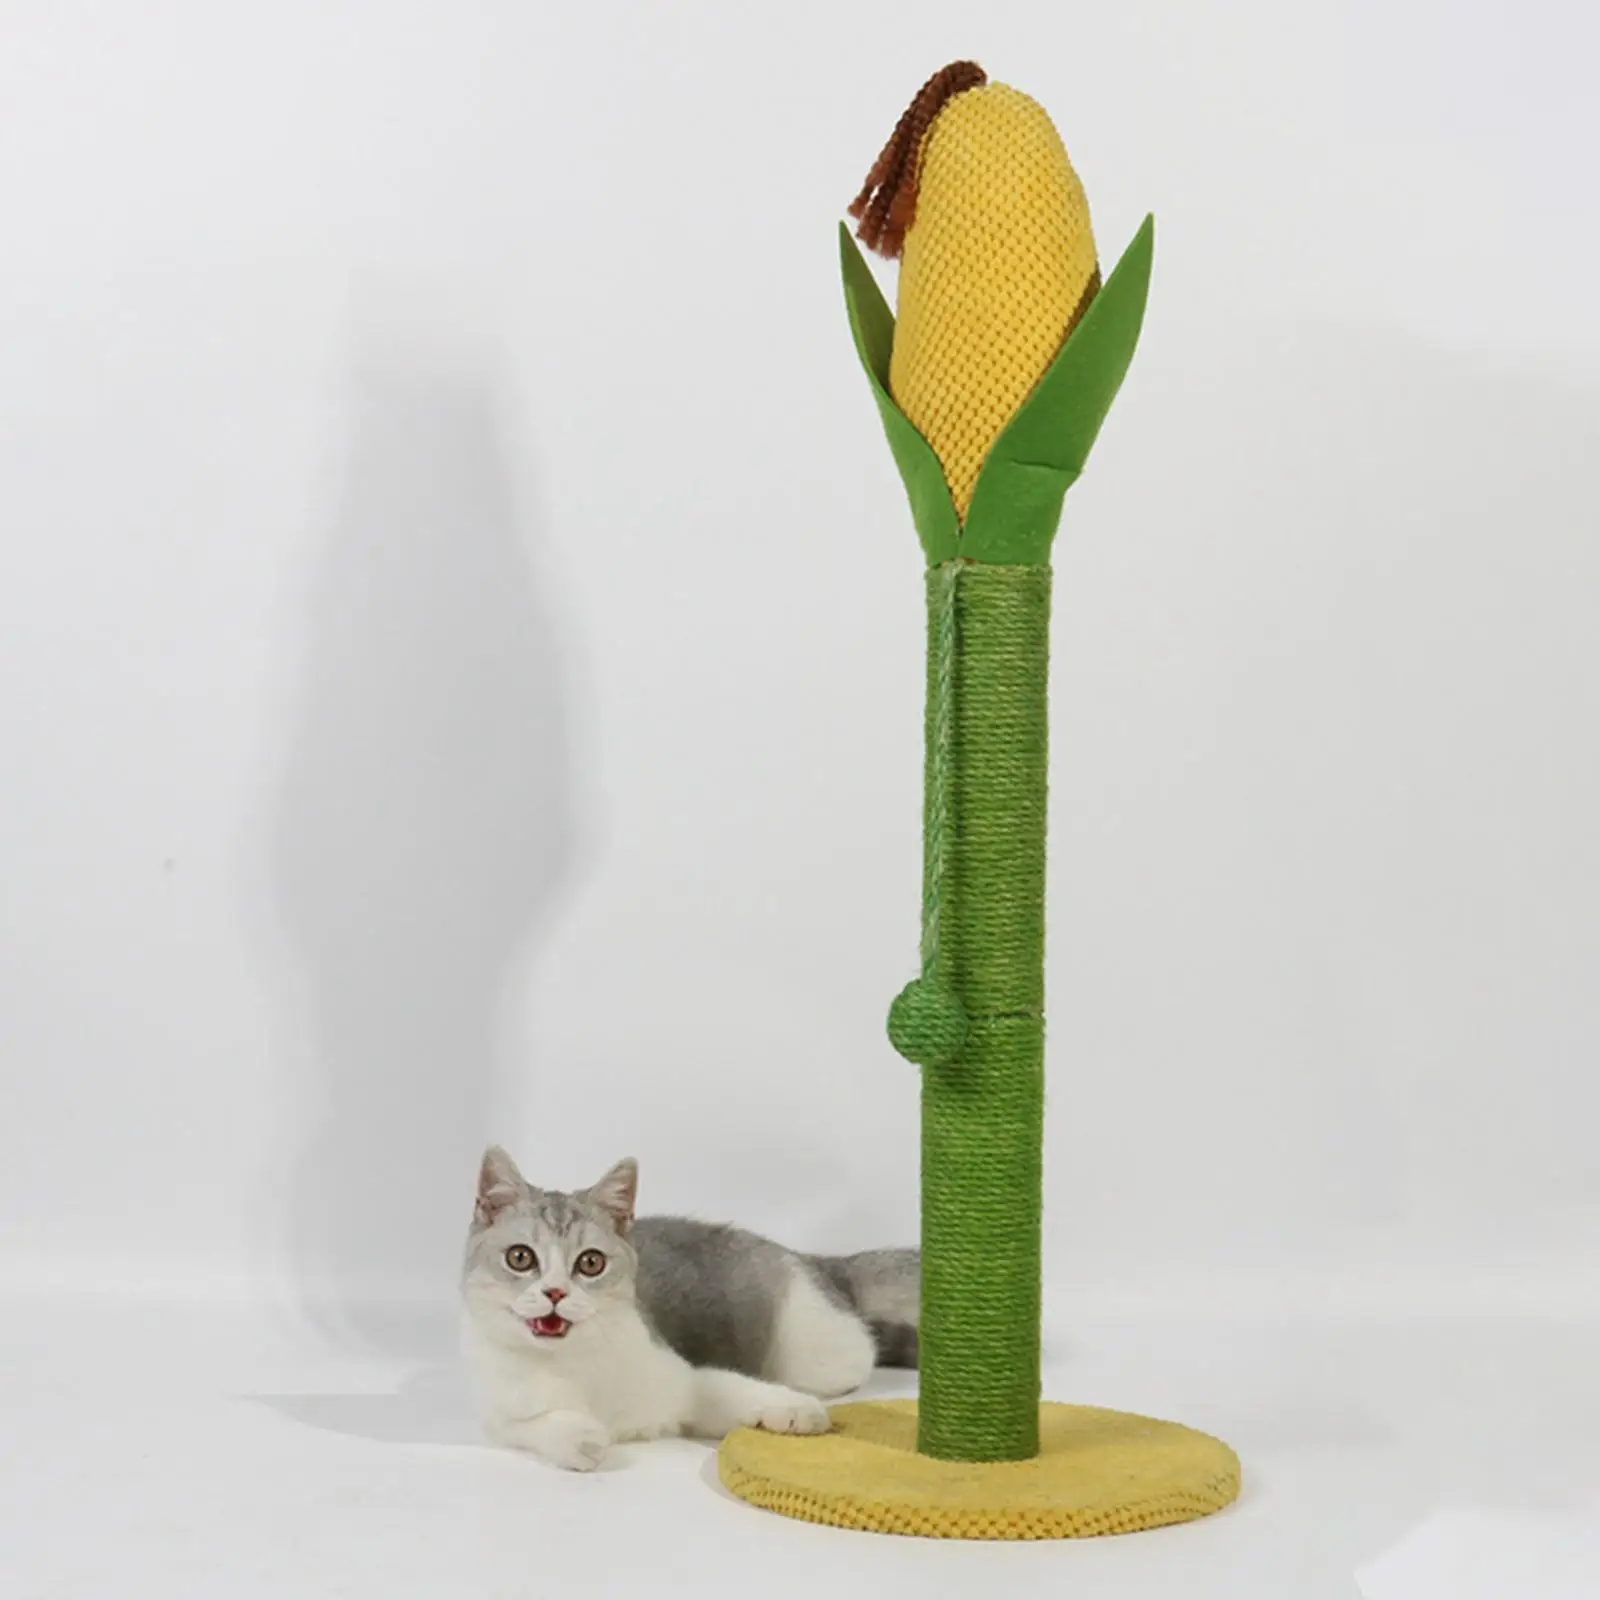 31.5inch Tall Cat Scratcher Post Interactive Toy Activity Center Pets Supplies Furniture Protection Corn Shaped Scratching Pole